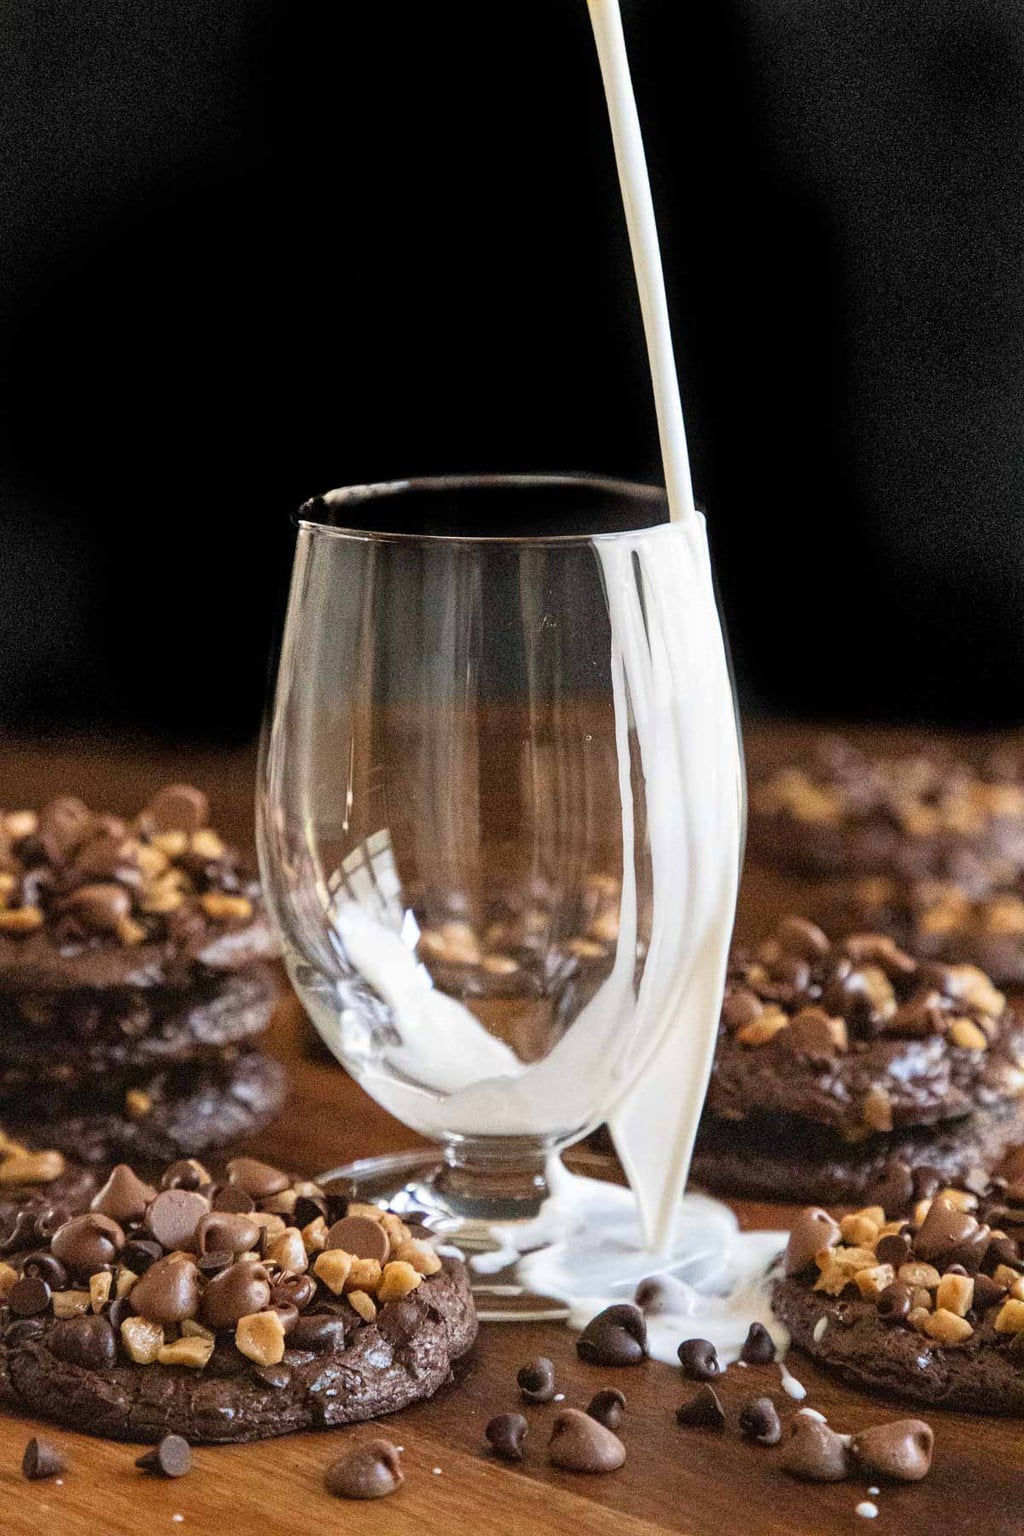 Vertical "oops" photo of milk spilling out over a glass surrounded by Flourless Toffee Chocolate Cookies .